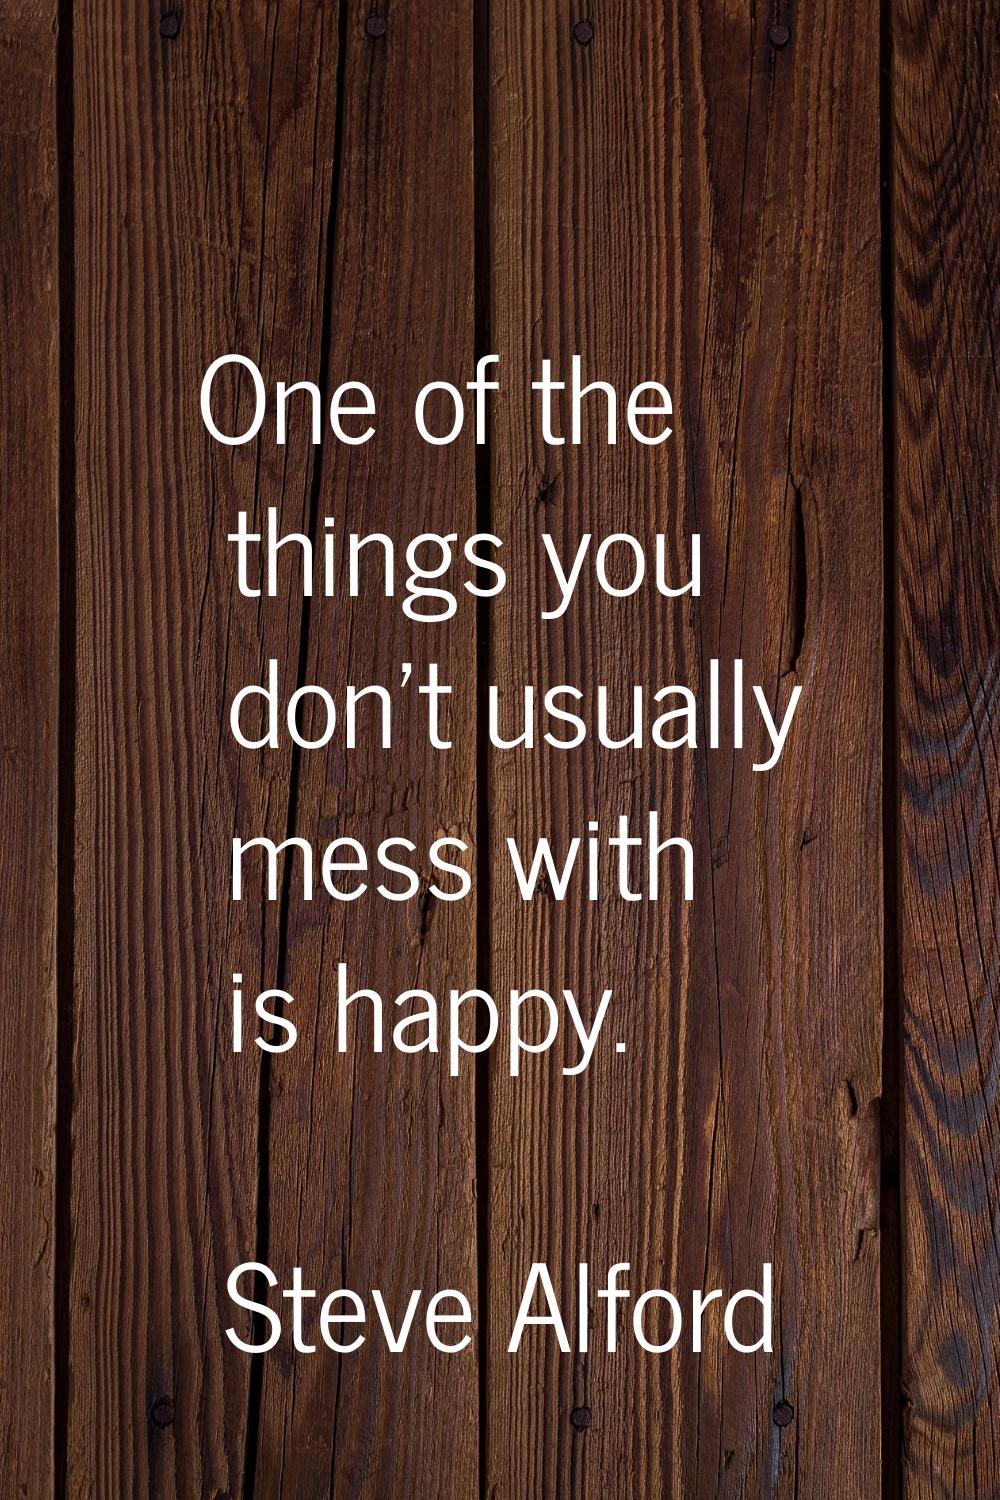 One of the things you don't usually mess with is happy.